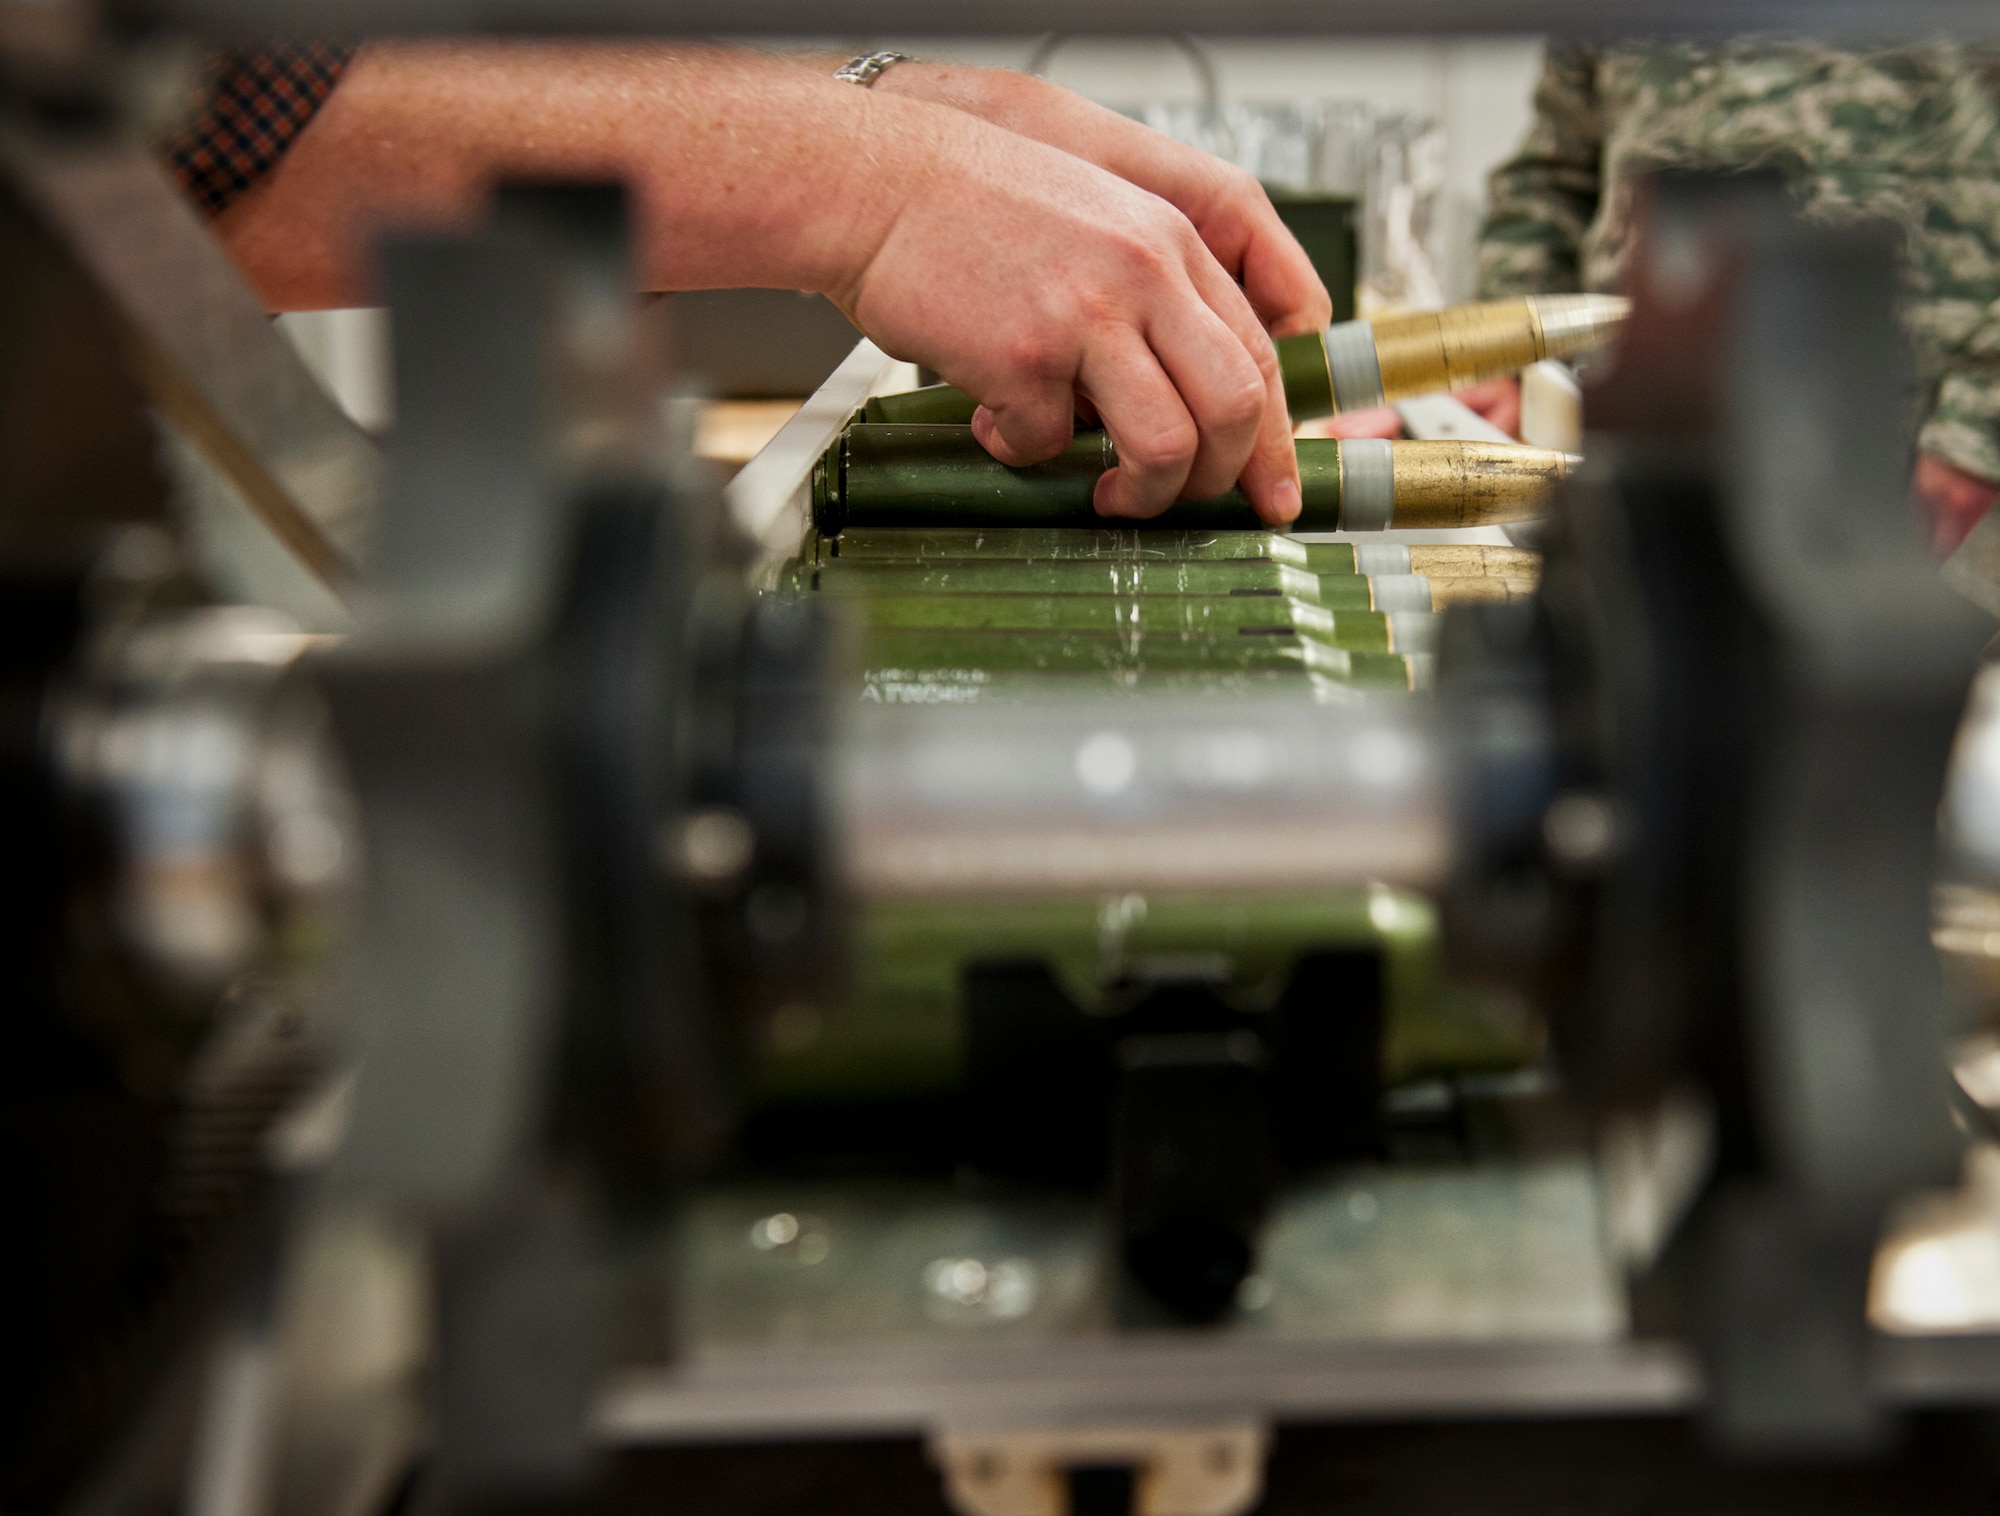 30mm ammunition rounds are loaded into the mobile, hand-cranked linker to be connected with MK-15 links for use on Air Force Special Operations Command C-130 aircraft.  The linker was created by the Munitions Materiel Handling Equipment Focal Point, a section under the Air Force Life Cycle Management Center’s Armament Directorate, specializing in developing locally manufactured equipment for the Air Force ammo and weapons communities.  The new linker is one-tenth the weight and cost of the current ammo linker in use and will be delivered to AFSOC units in May.  (U.S. Air Force photo/Samuel King Jr.)